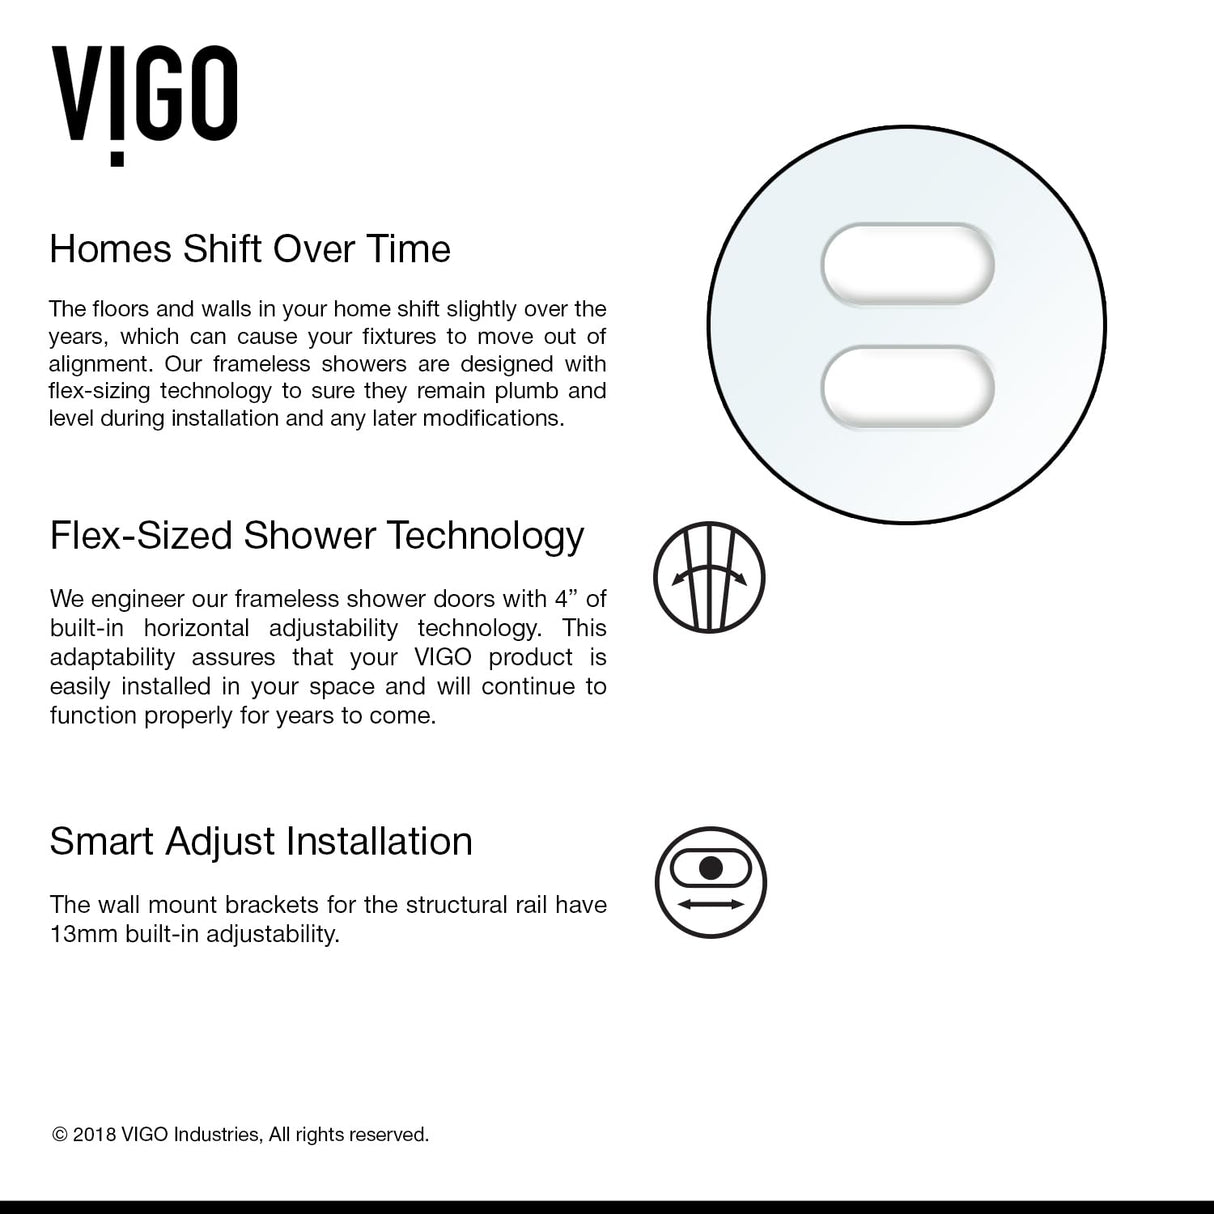 VIGO Adjustable 72-73" W x 74" H Ferrara Frameless Sliding Rectangle Shower Door with Clear Tempered Glass, Reversible Door Handle and Stainless Steel Hardware in Chrome-VG6080CHCL7274